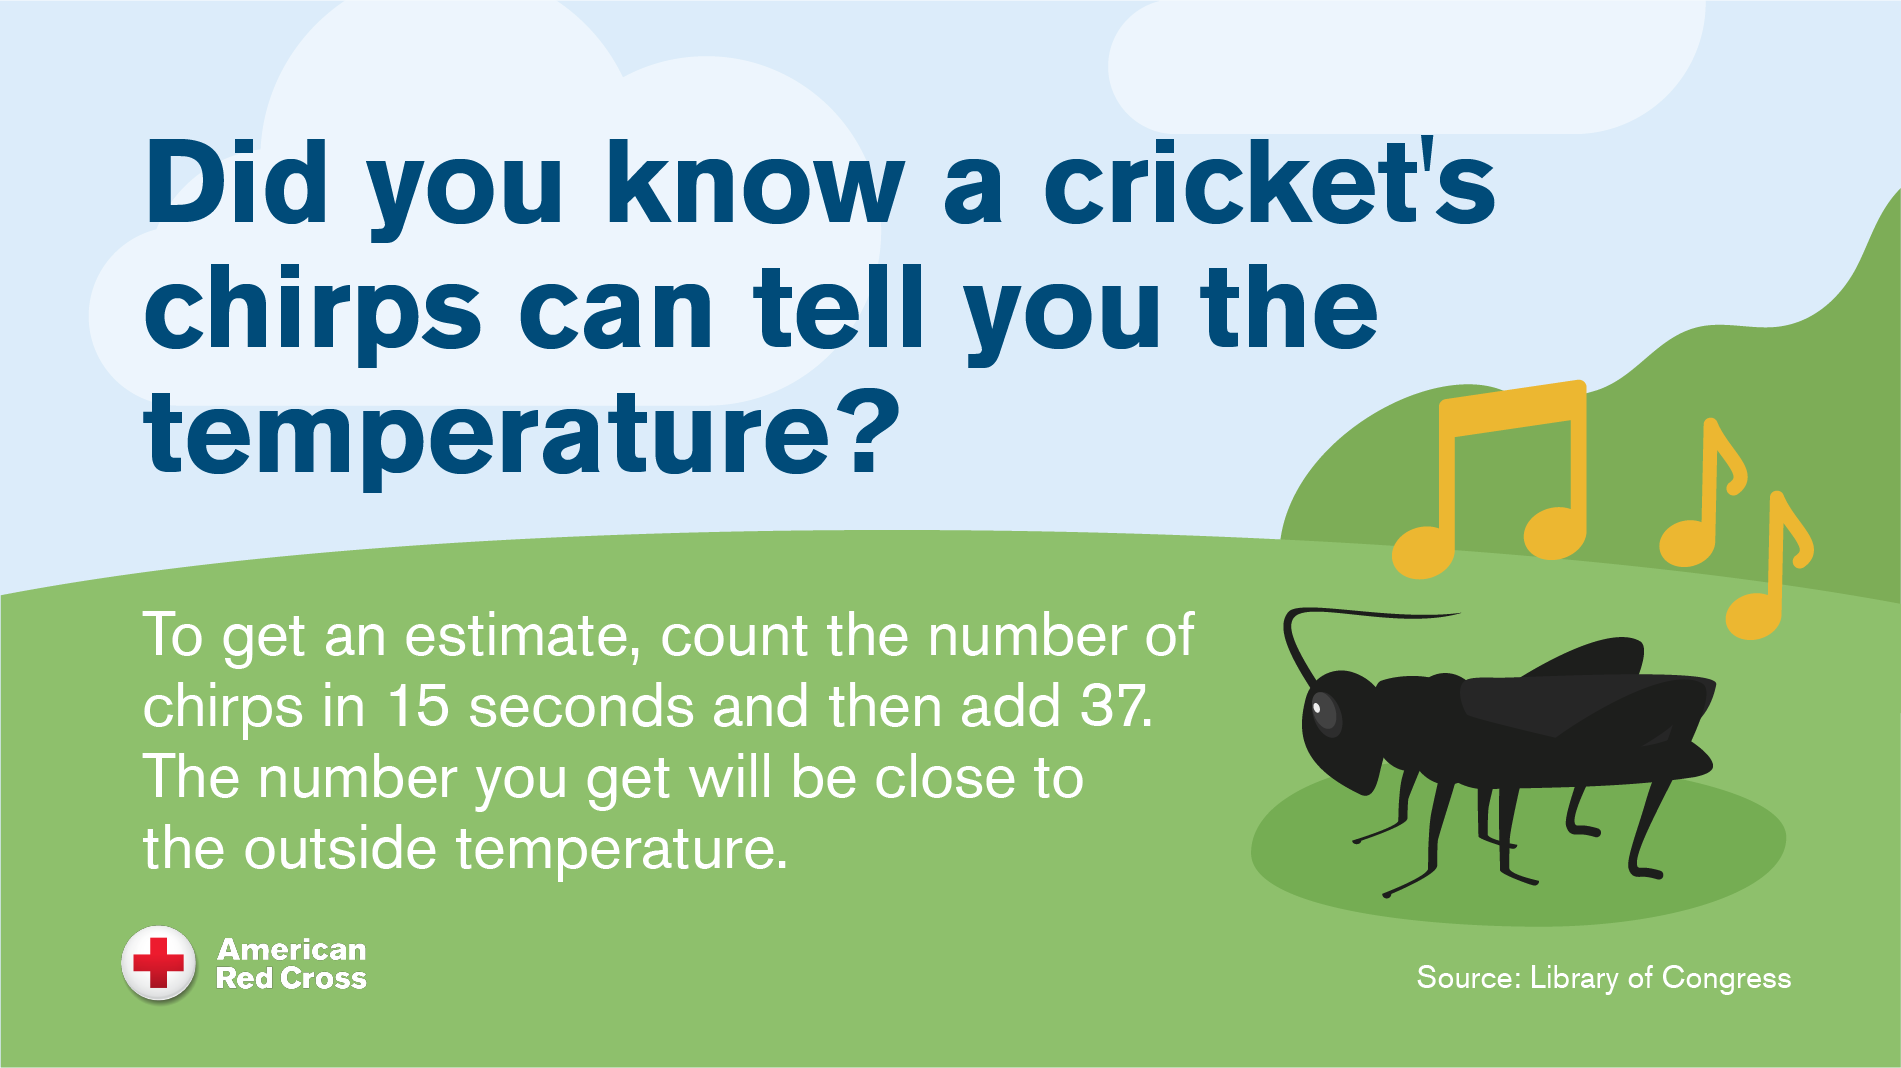 Did you know a cricket's chirps can tell you the temperature?